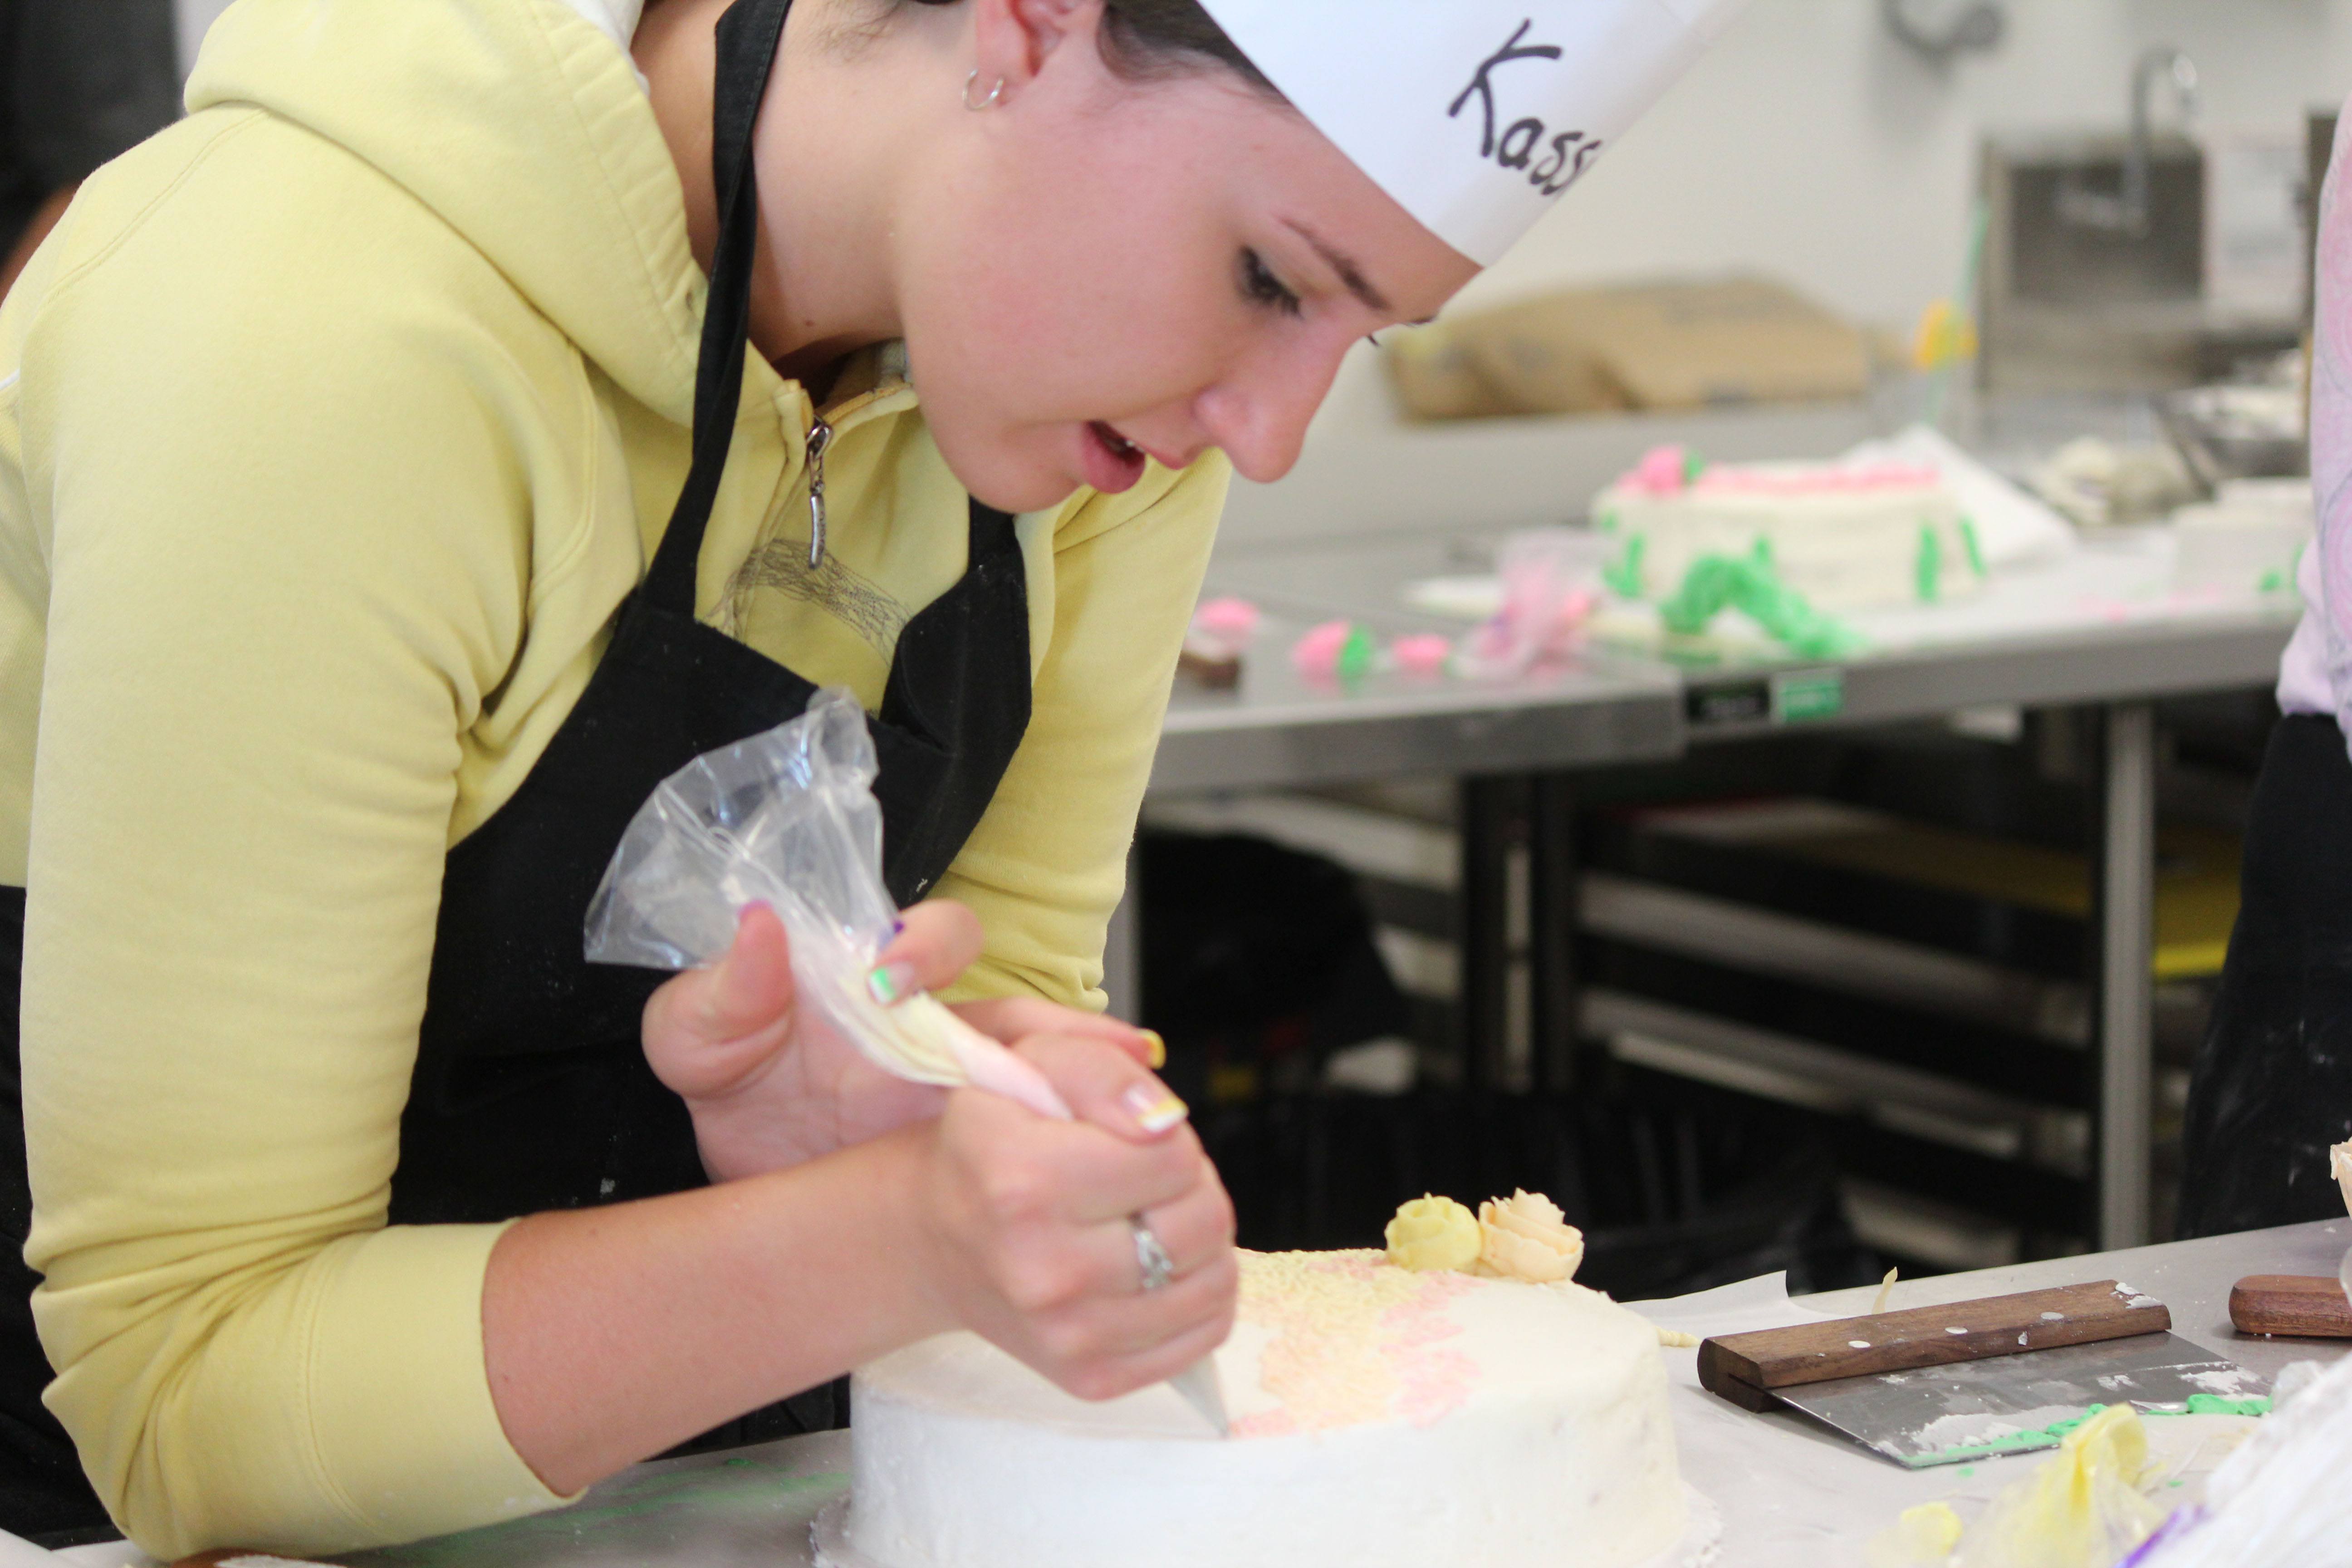 ICING- Kassie Scholze puts some finishing touches on her cake she was decorating as part of a workshop at RDC on the weekend.